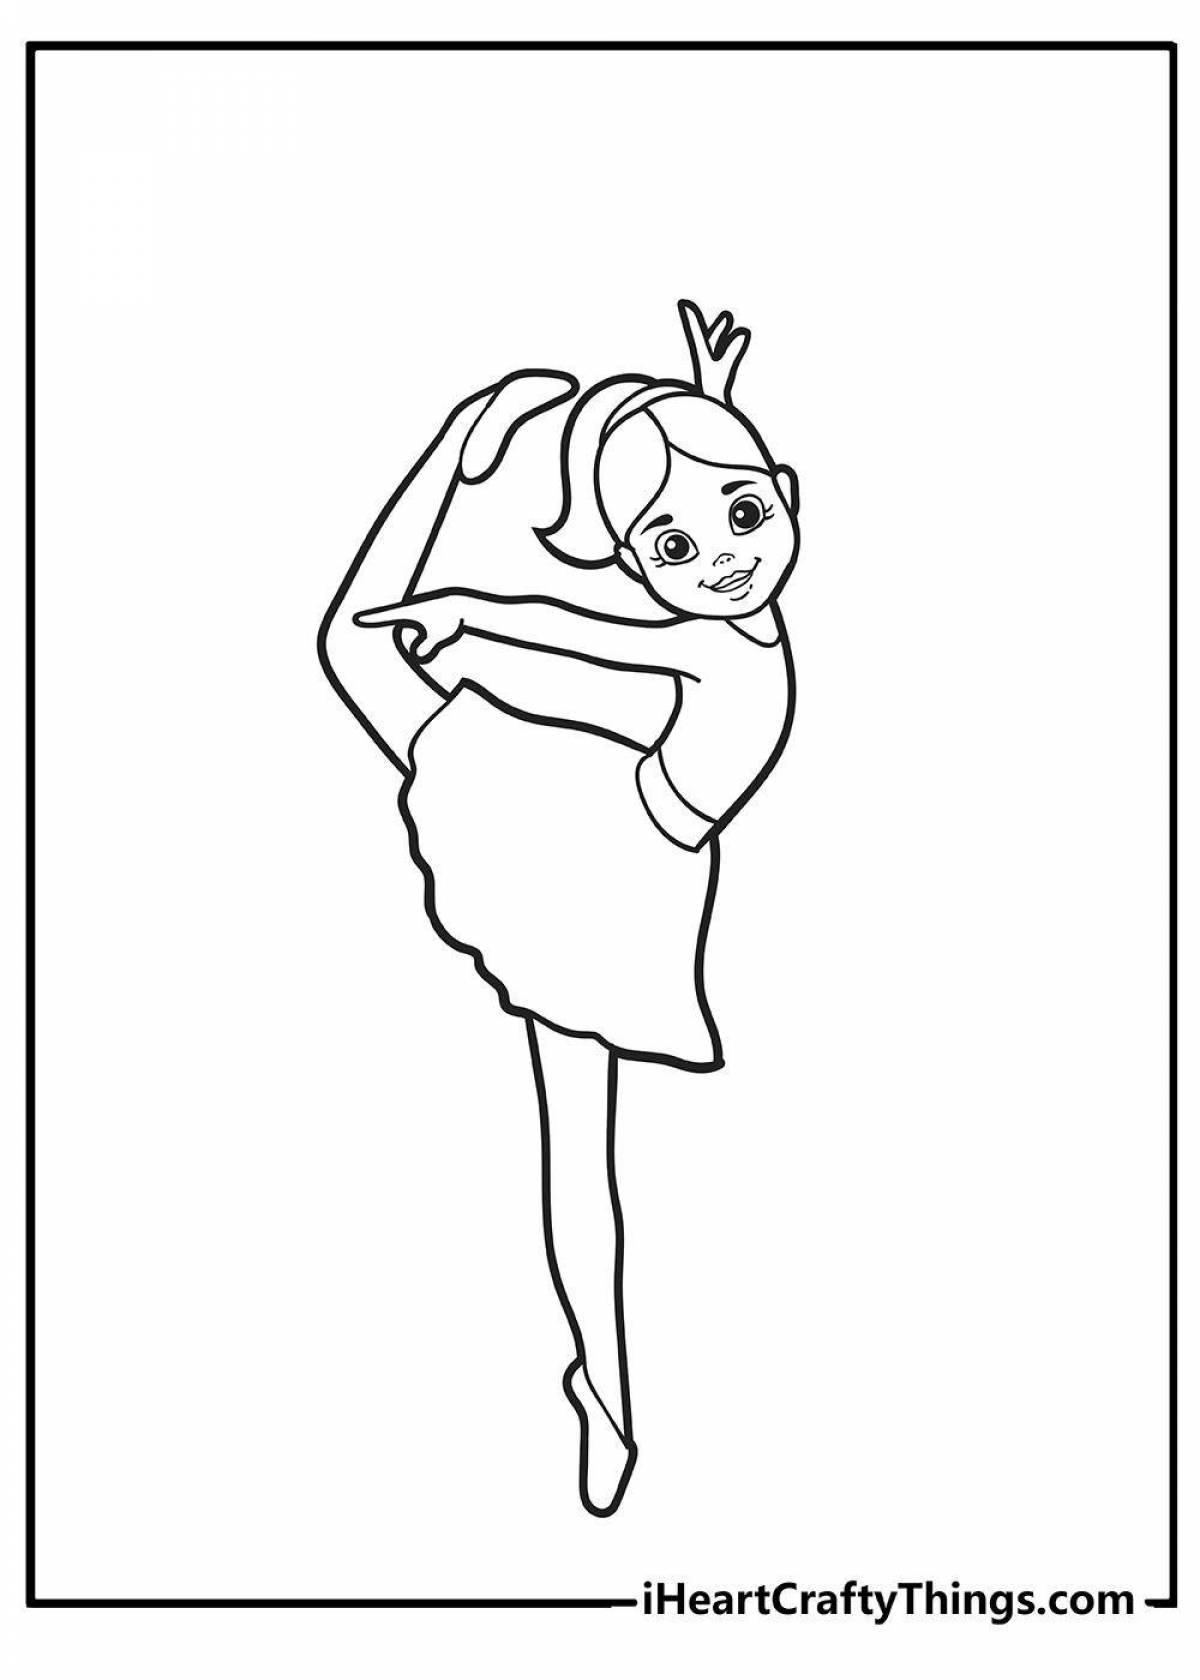 Coloring page exquisite ballerina bunny